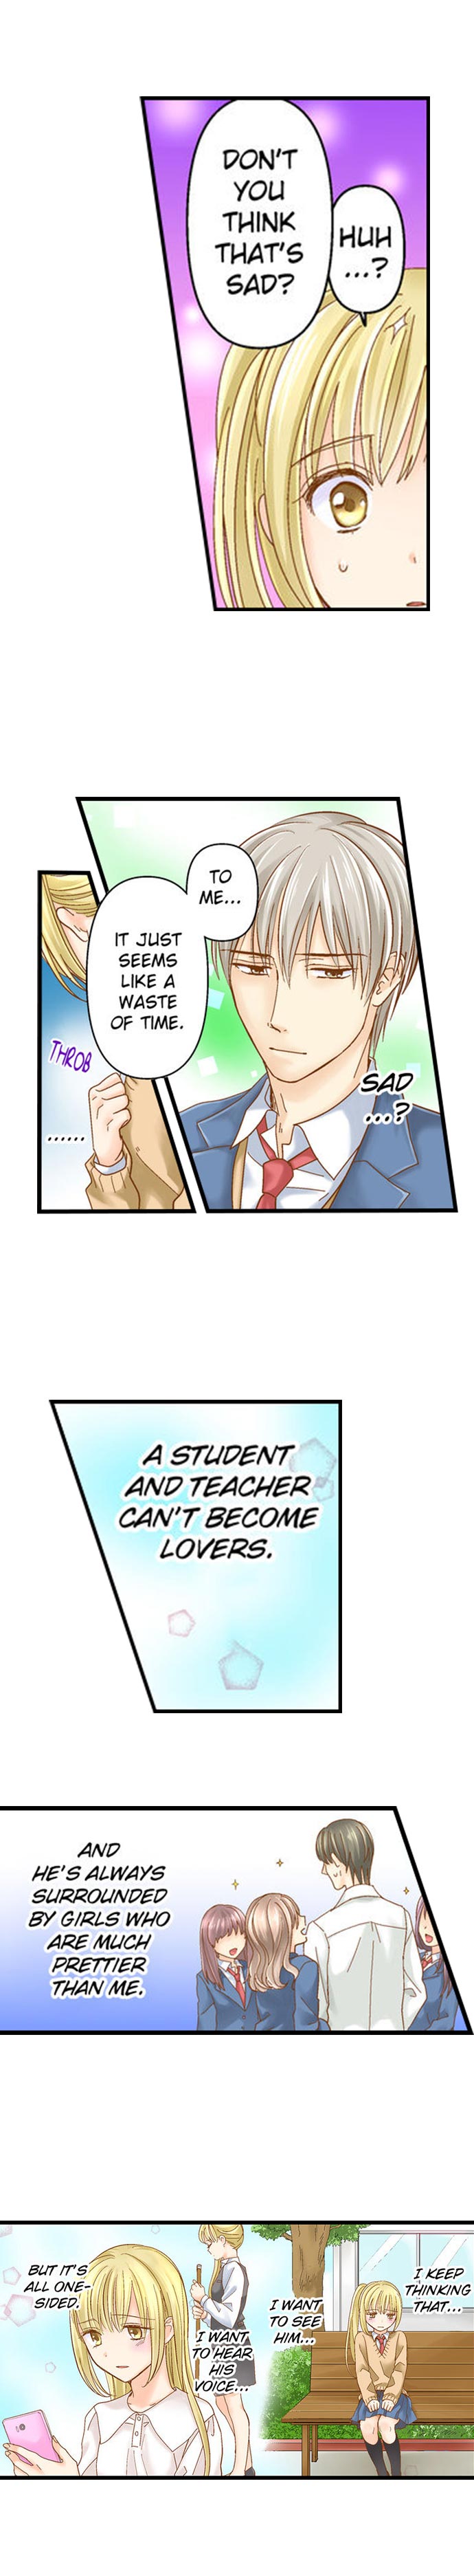 Running a Love Hotel with My Math Teacher - Chapter 43 Page 6